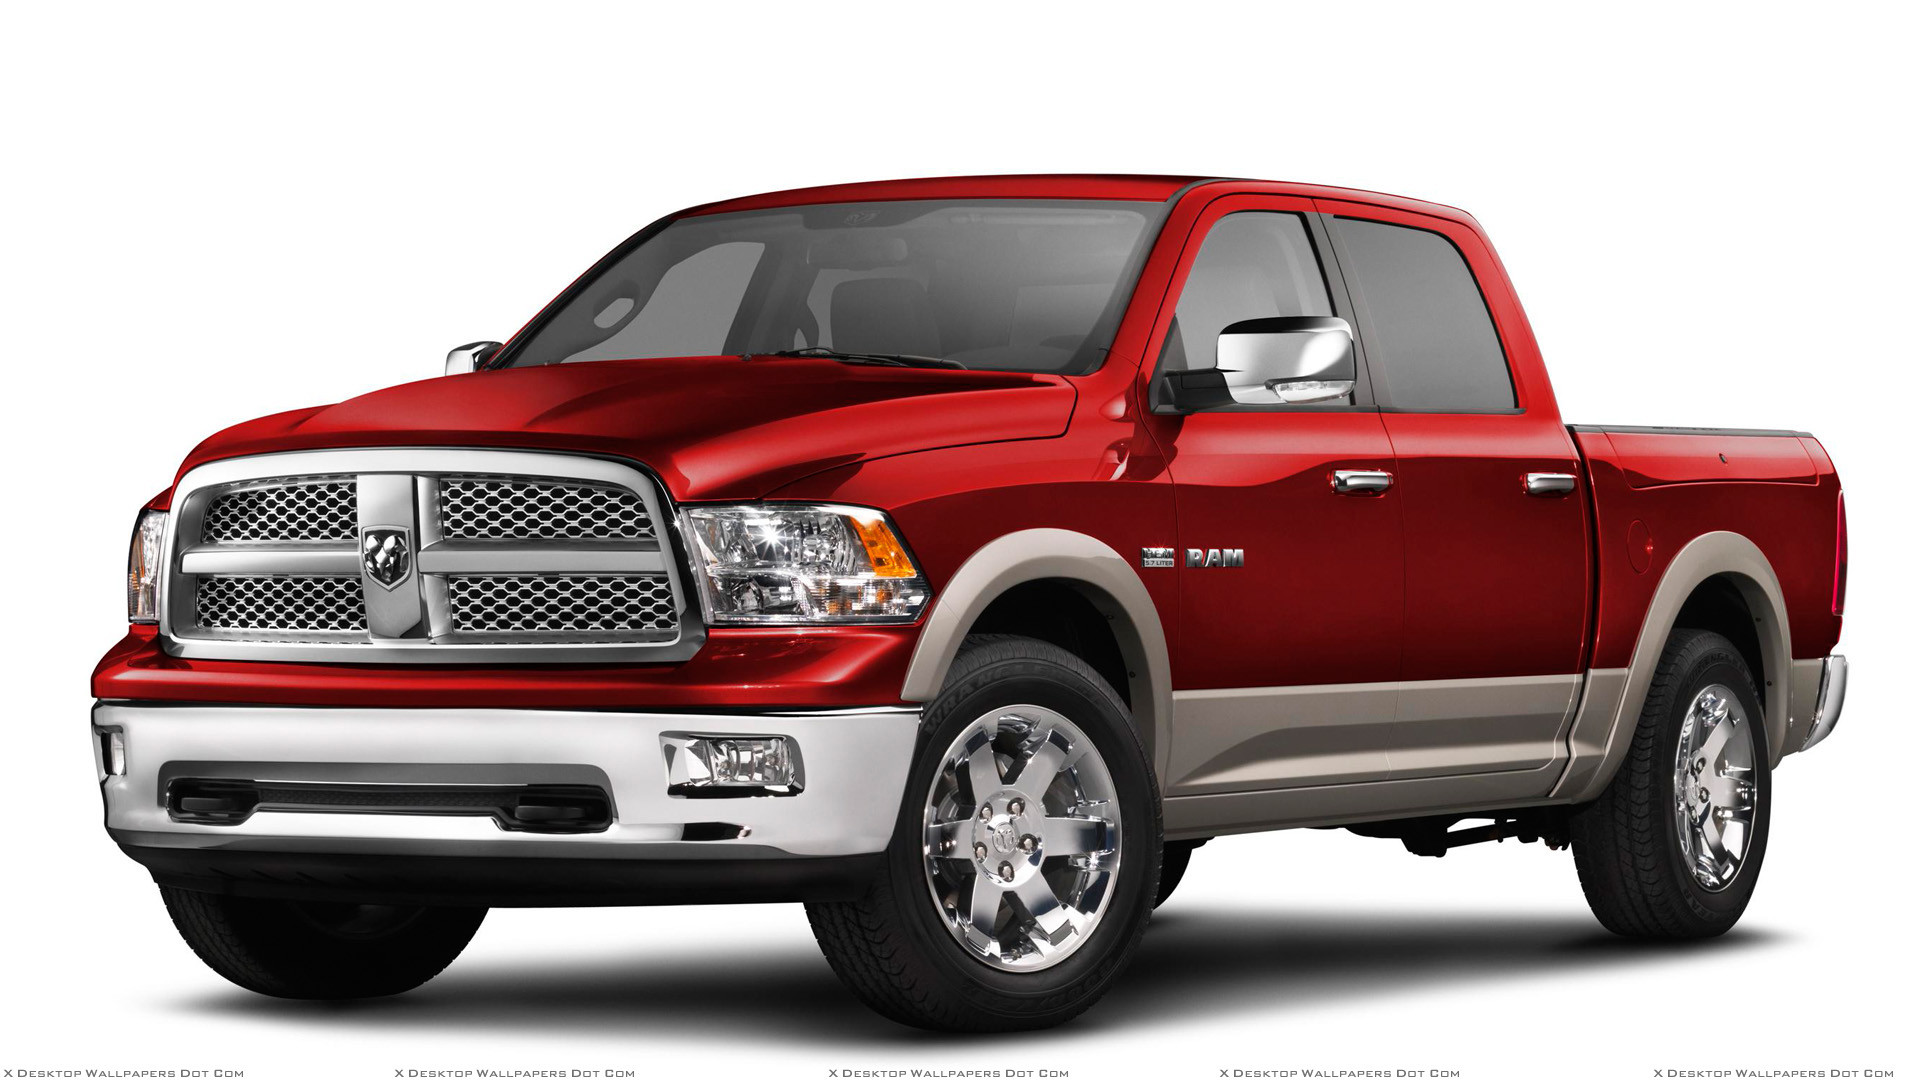 1920x1080 You are viewing wallpaper titled "2009 Dodge Ram 1500 ...